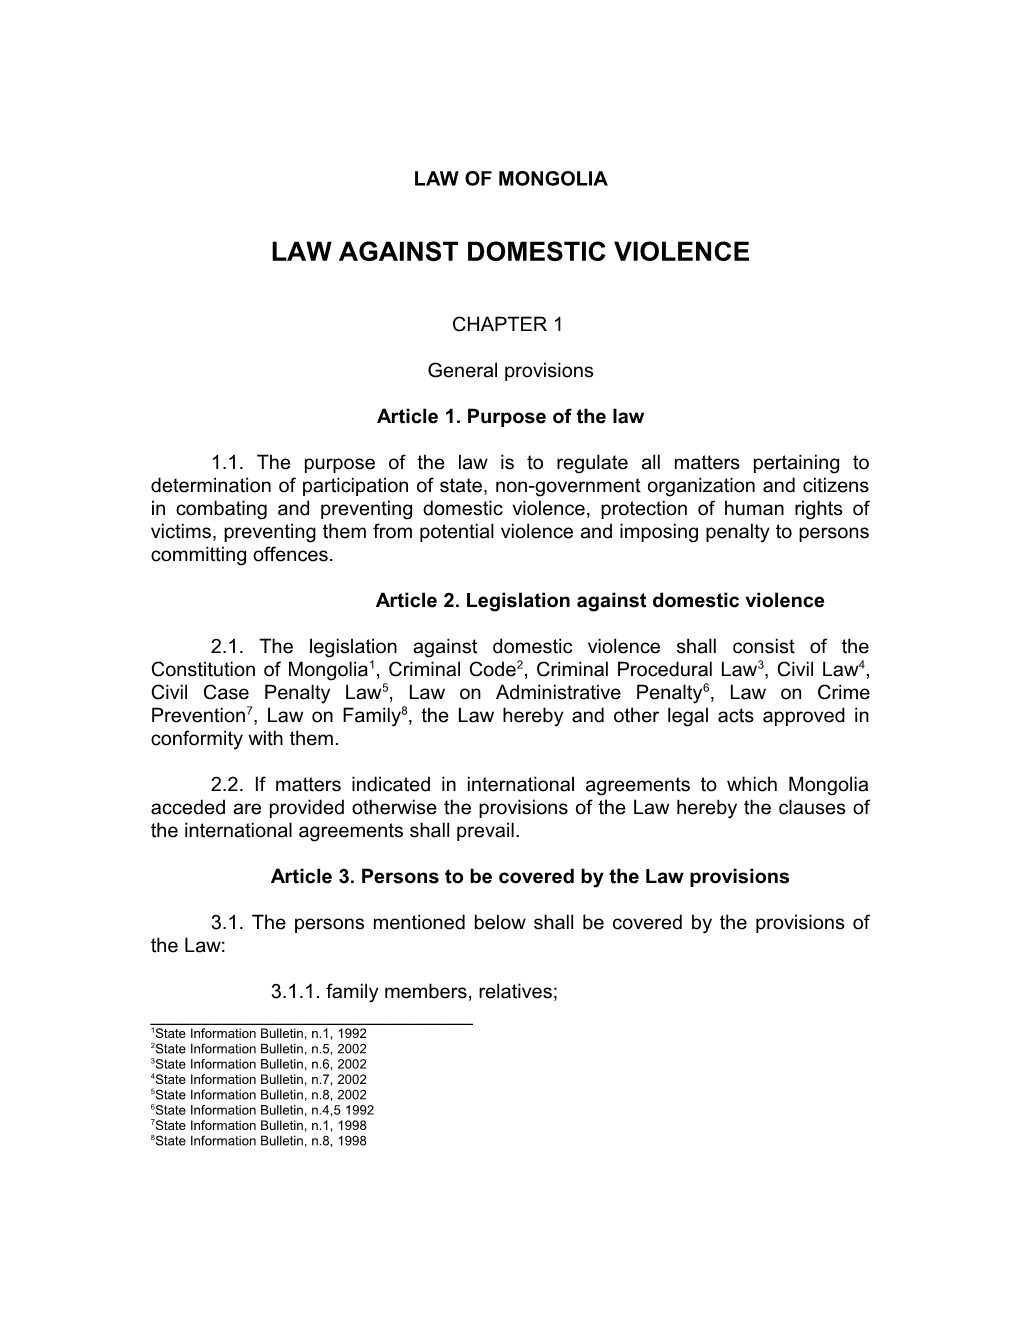 Law Against Domestic Violence